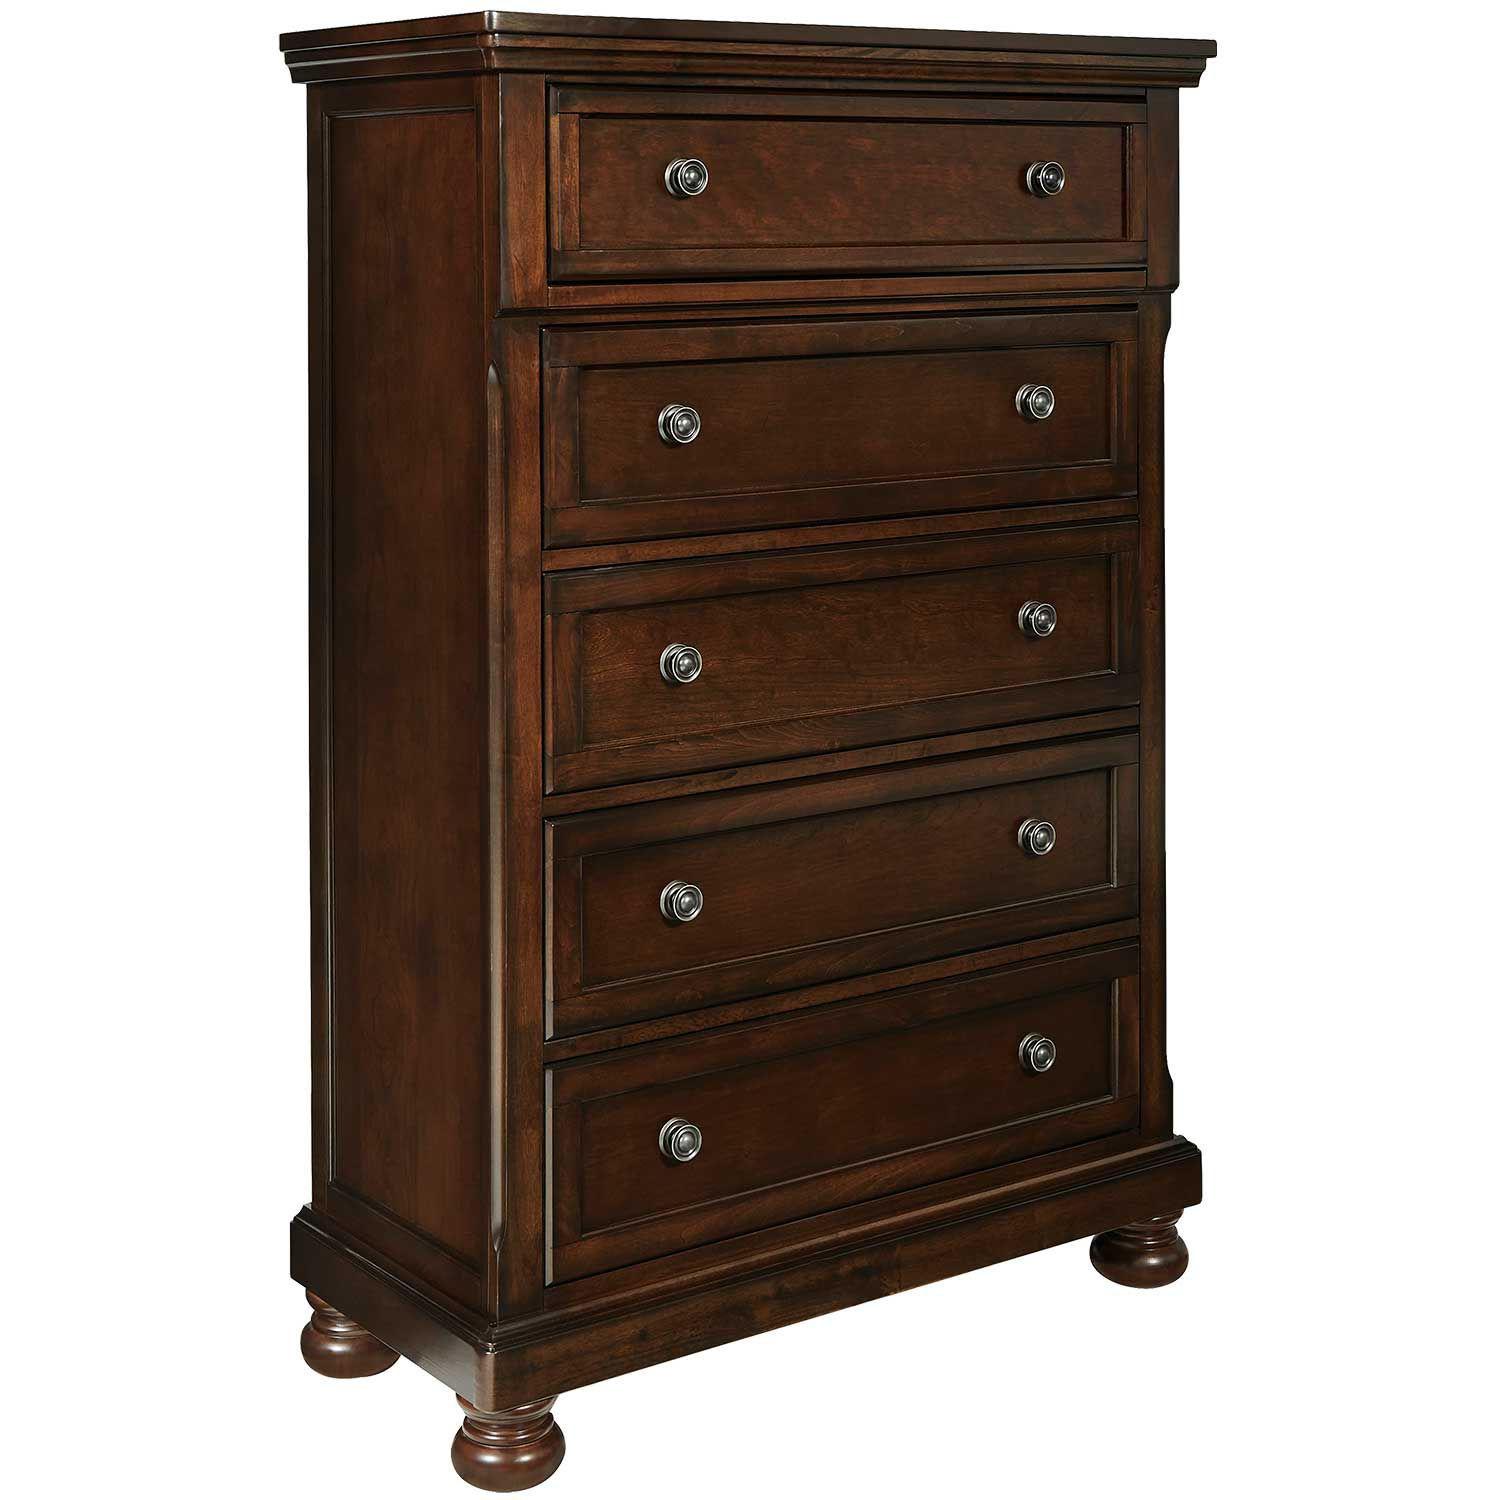 Classic, Traditional, Transitional Chest BALTIMORE GHF-808857804877 in Walnut 